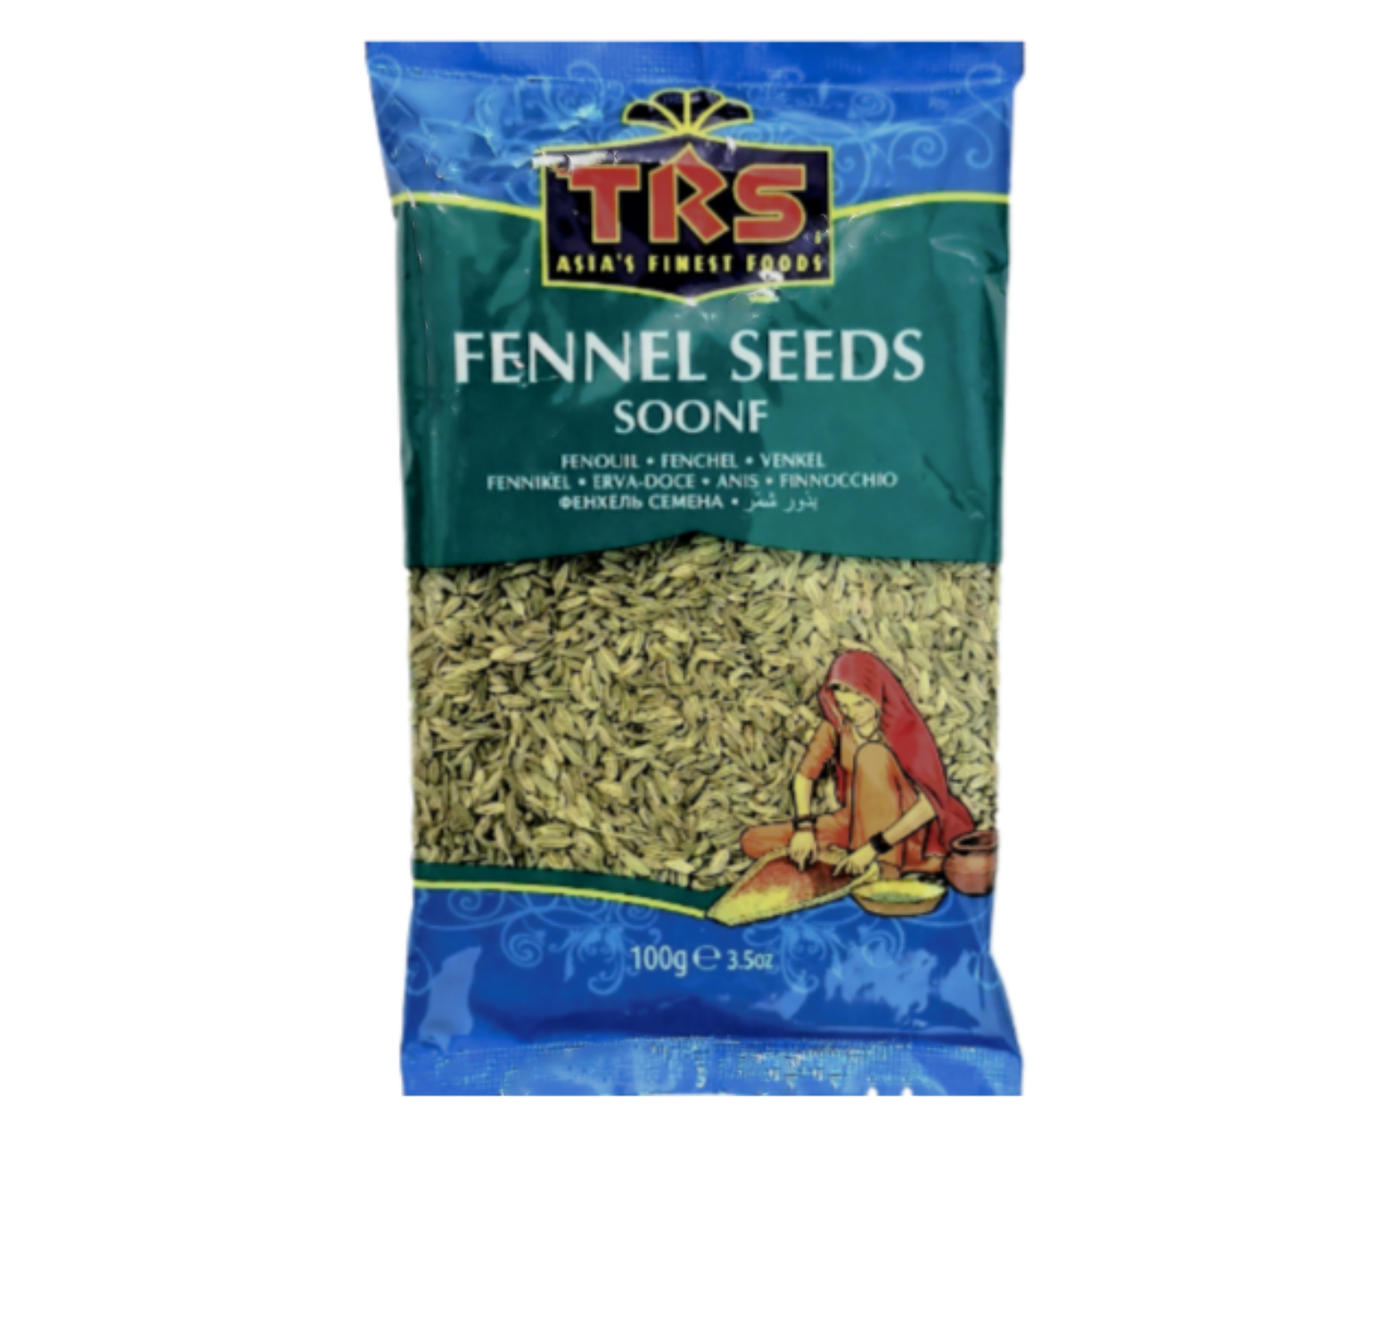 TRS Fennel Seeds (Soonf)